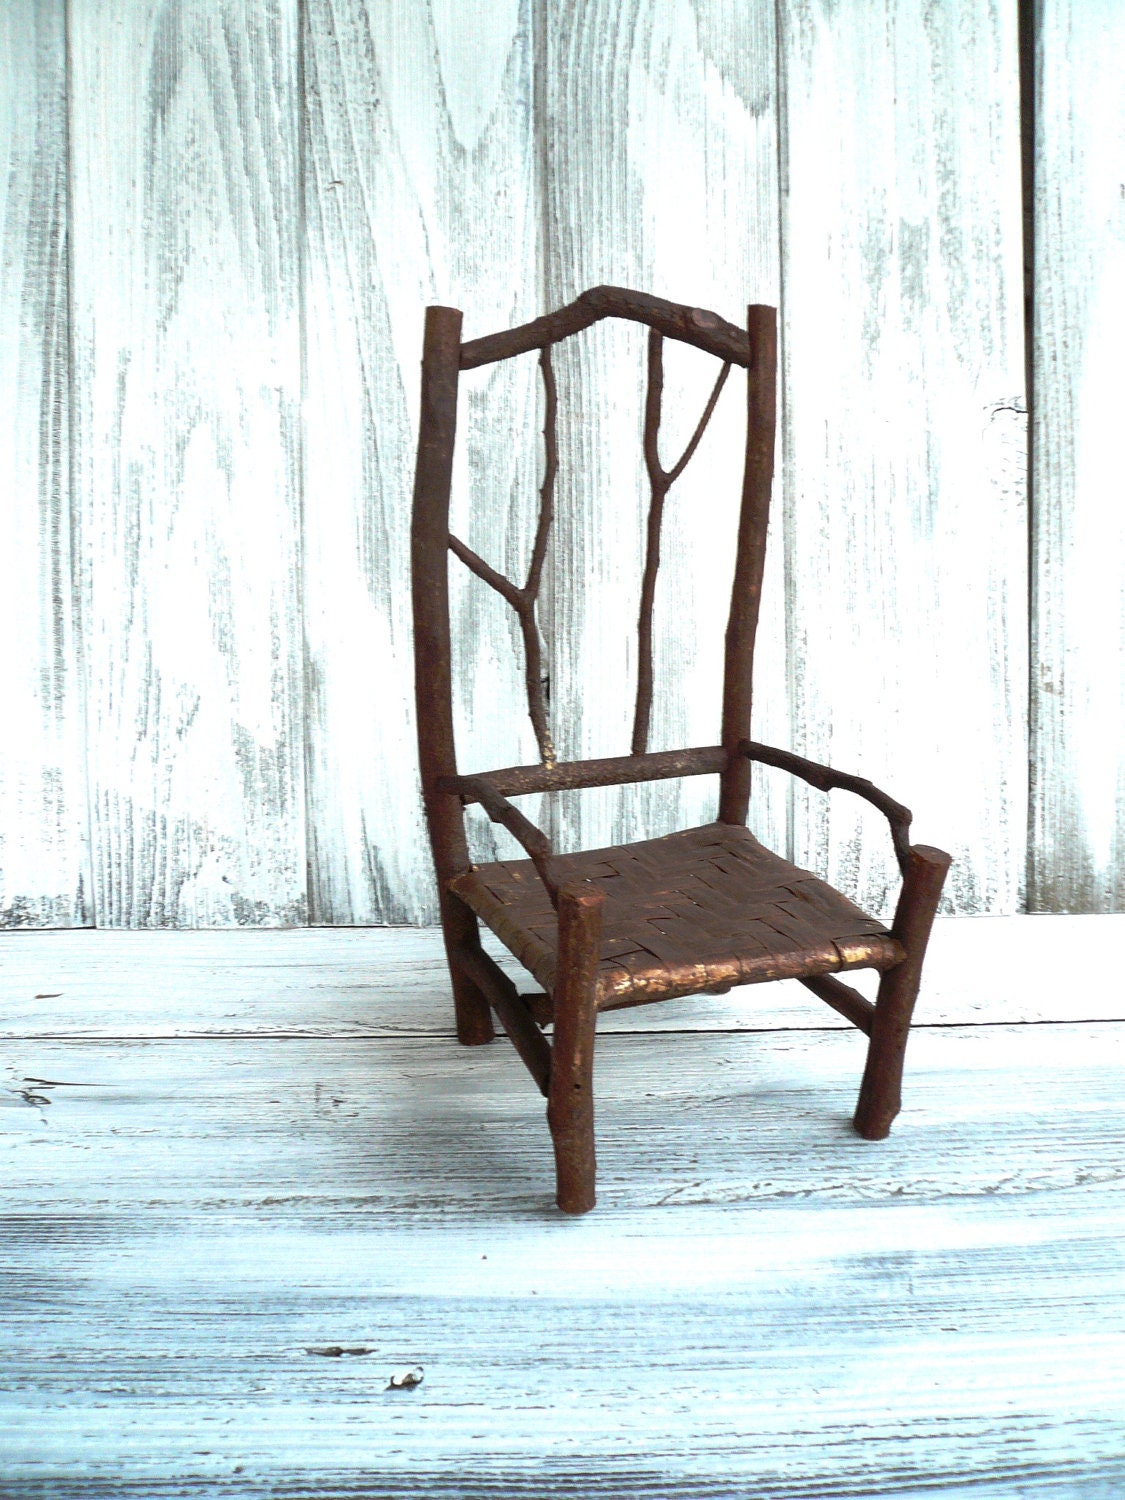 Small rustic chair made of twigs for home decor, weddings, garden, gifts - shabby chic - BelleAdora